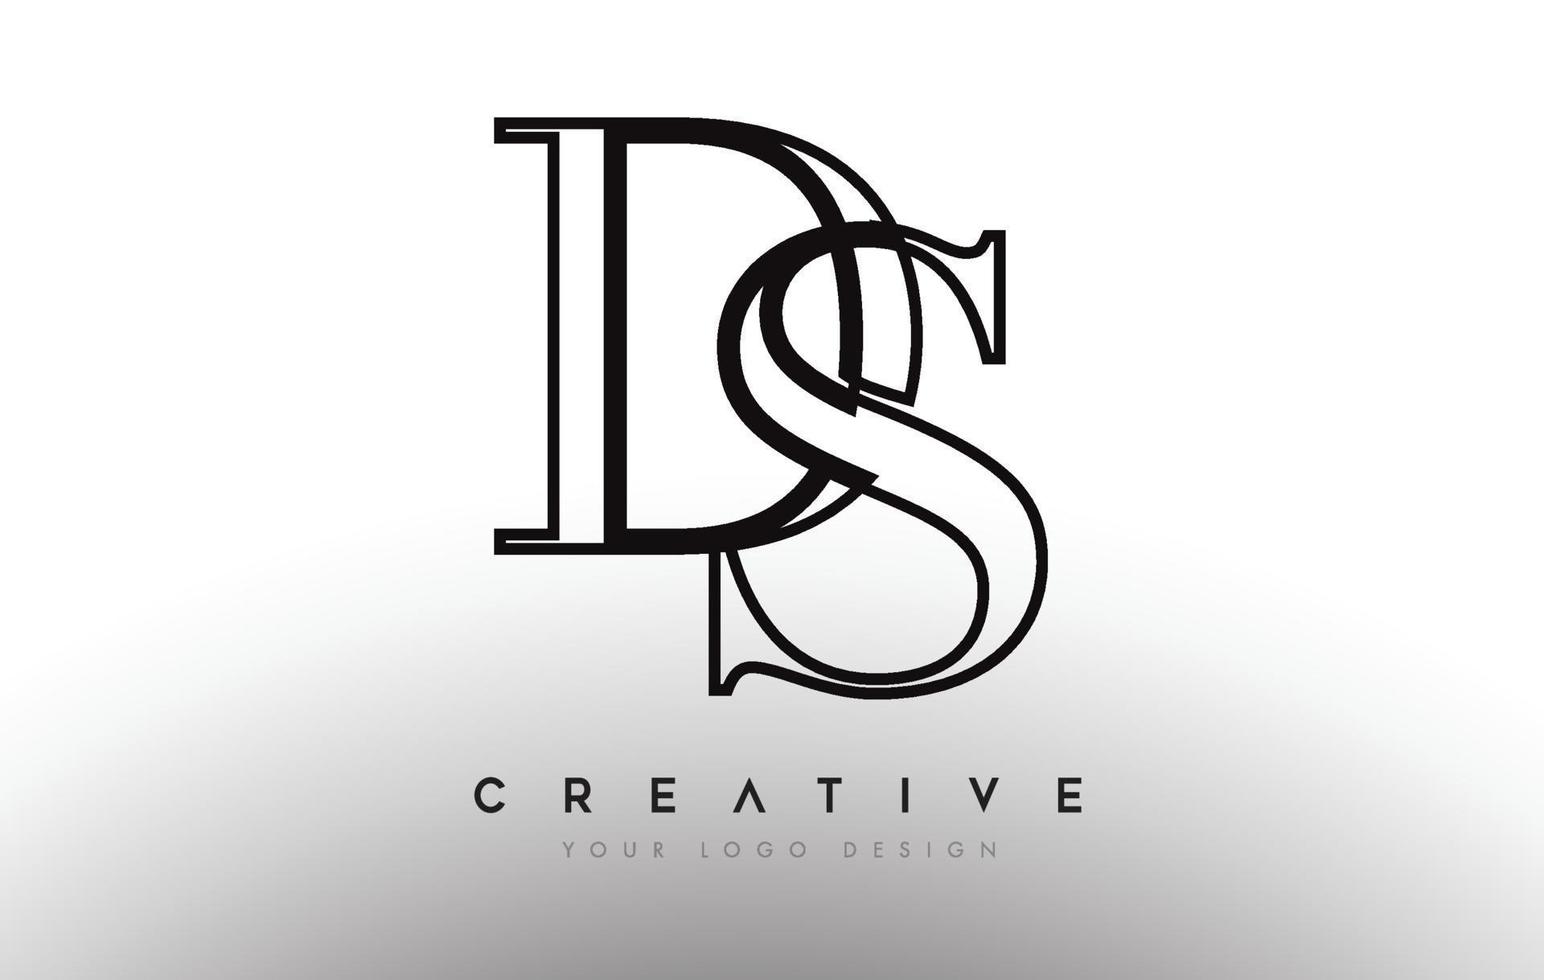 DS ds letter design logo logotype icon concept with serif font and classic elegant style look vector